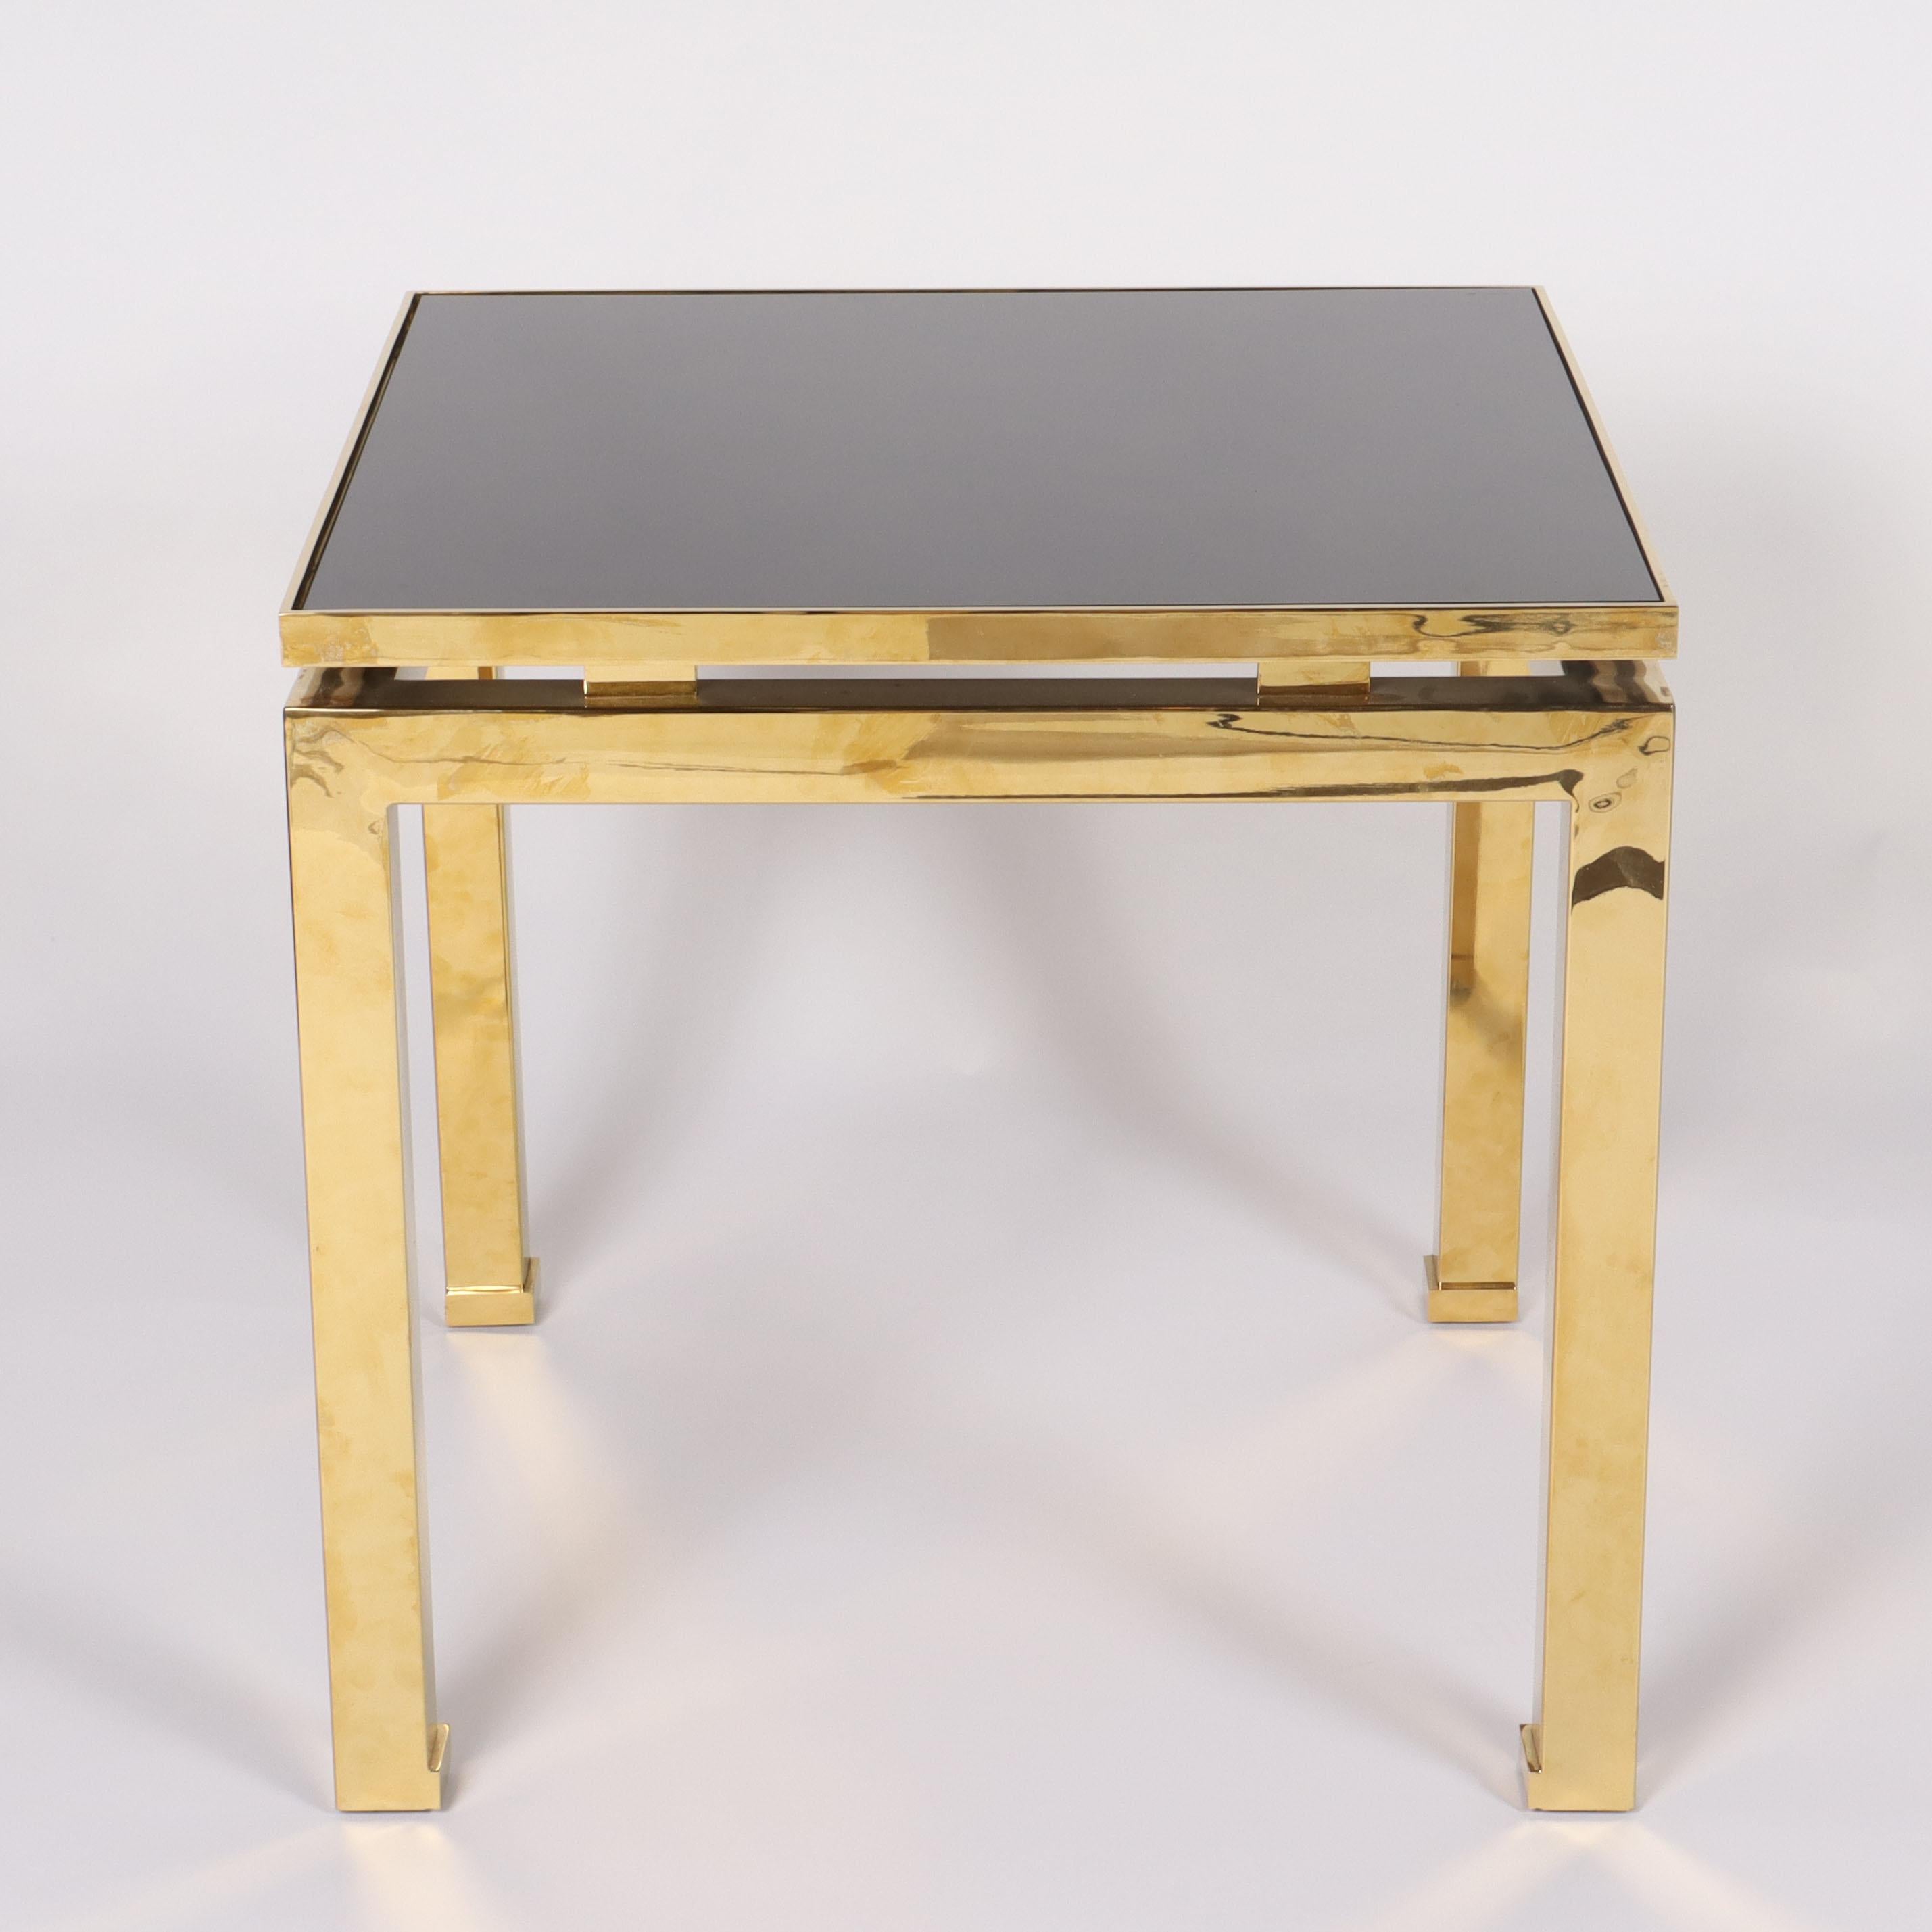 French side table in the style of Maison Jansen, c. 1970.